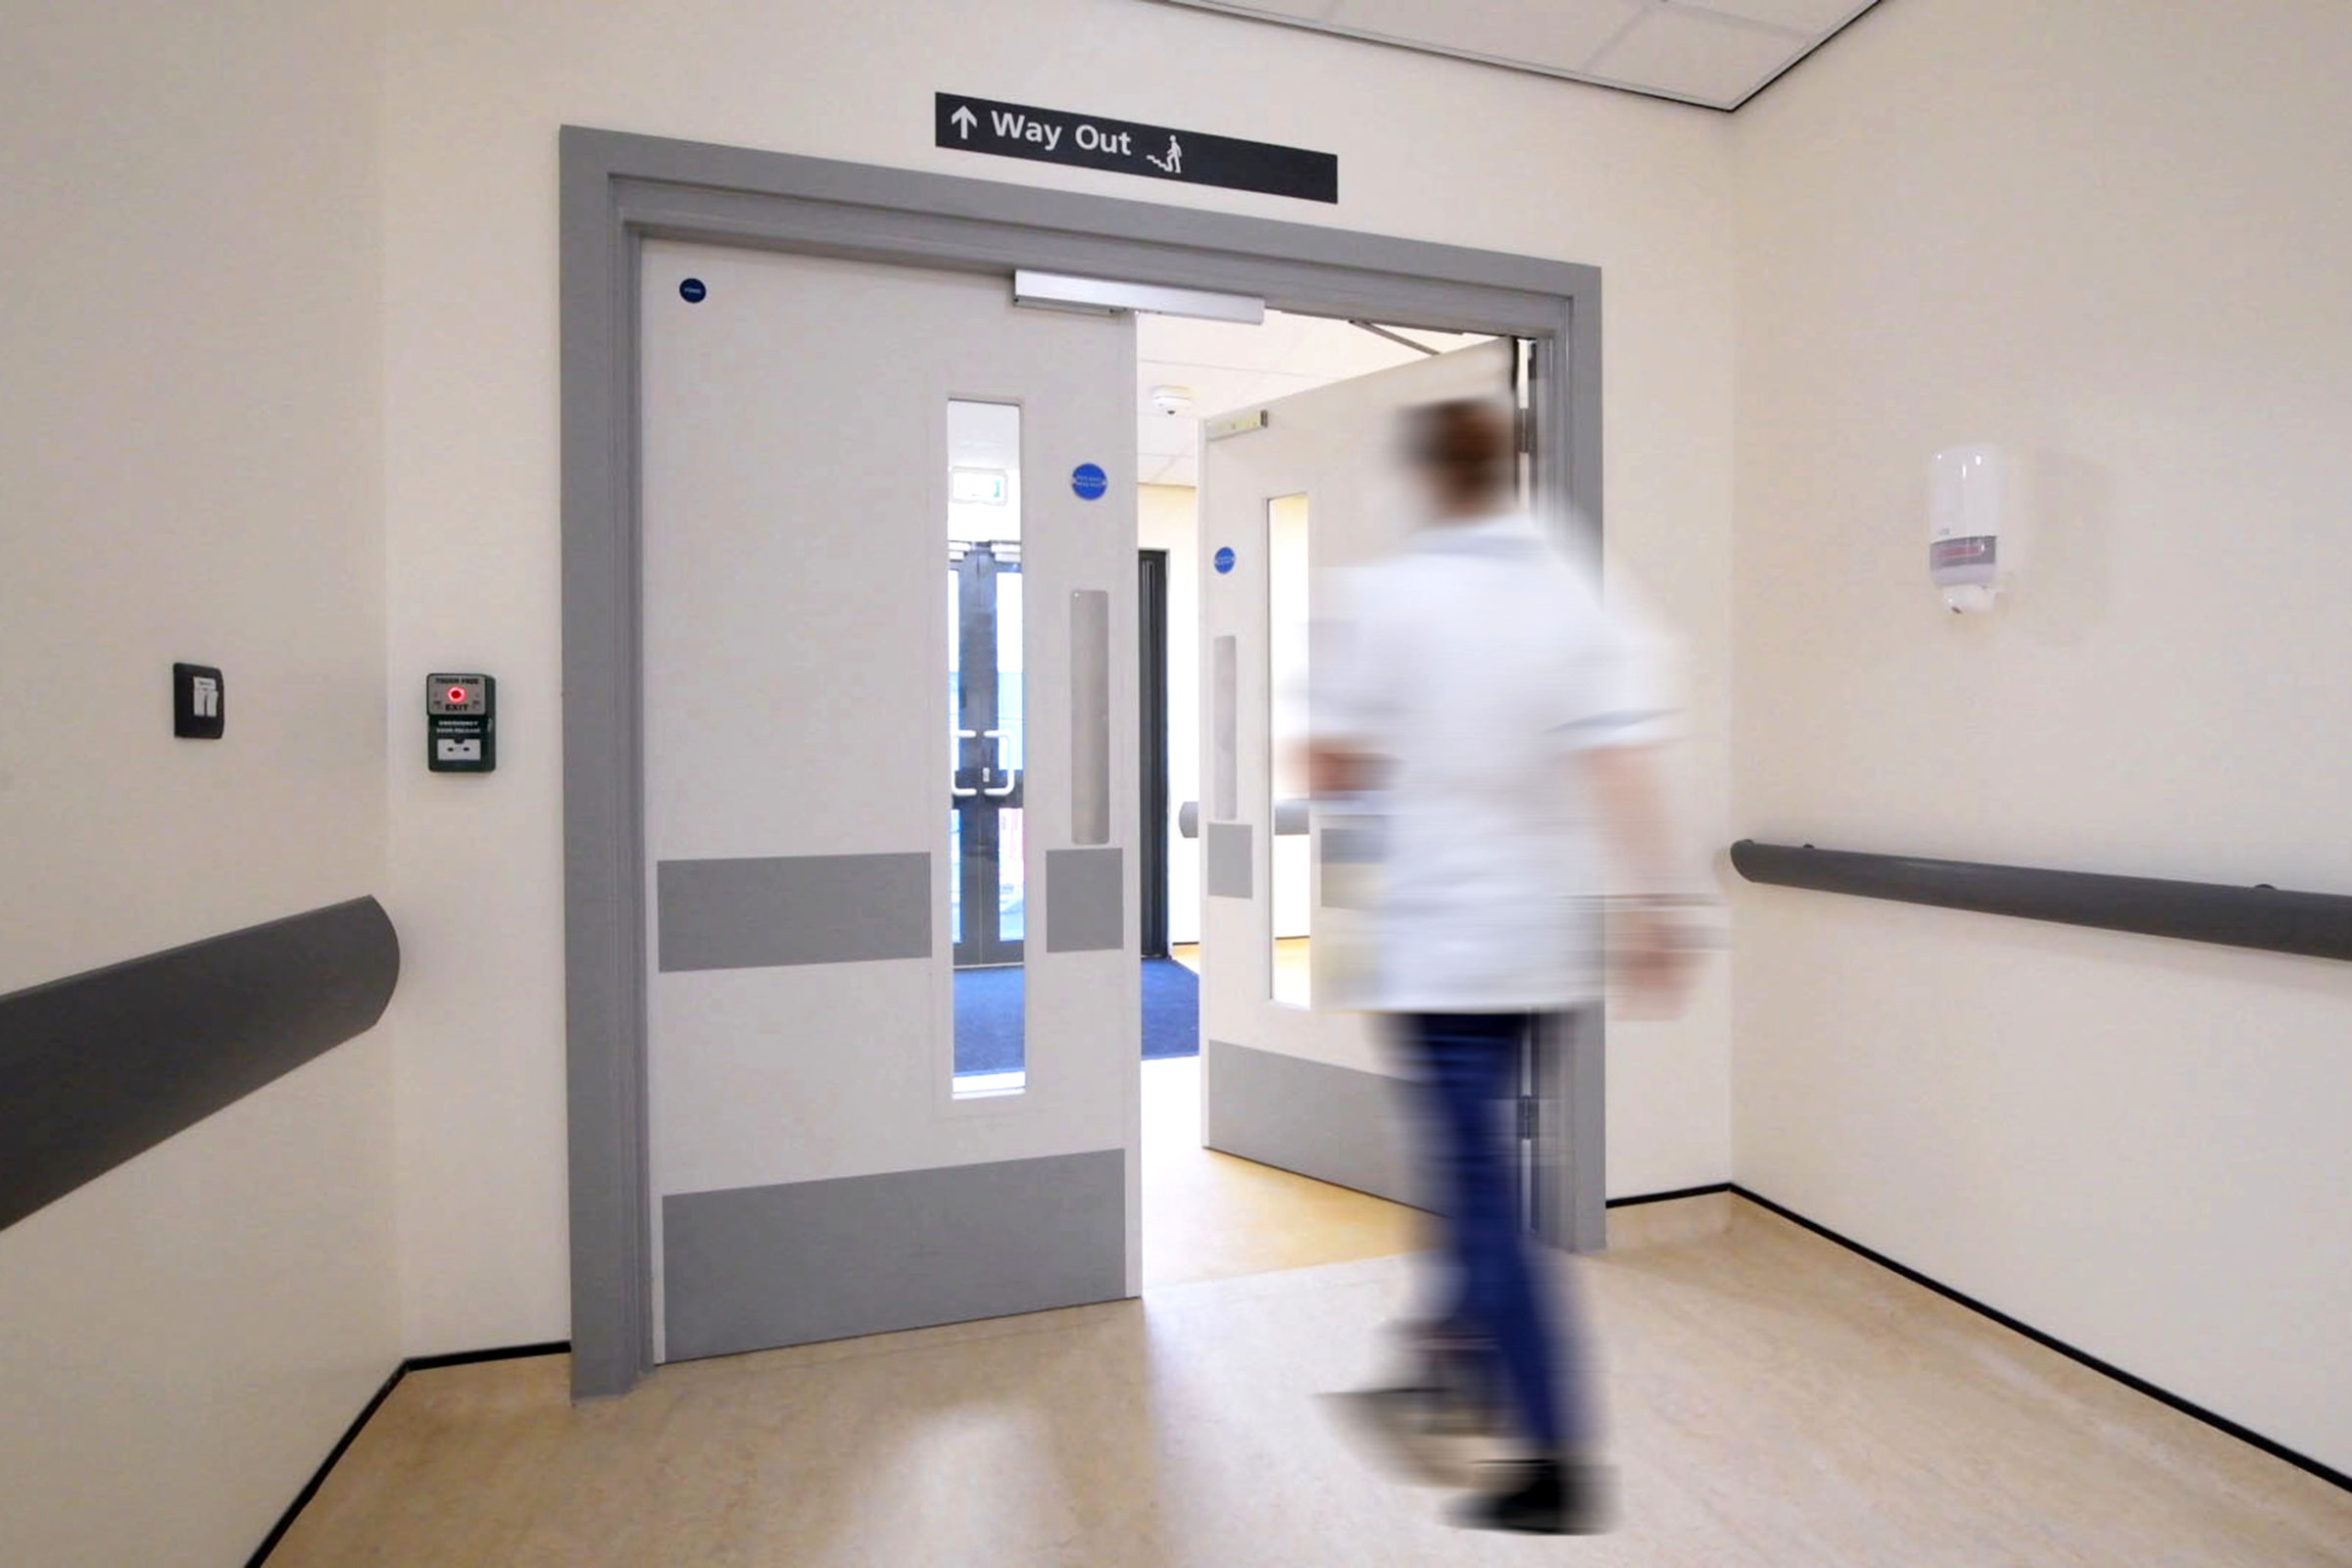 Healthcare Doorsets Manufactured for a New Modular Building at Queen Alexandra Hospital in Portsmouth